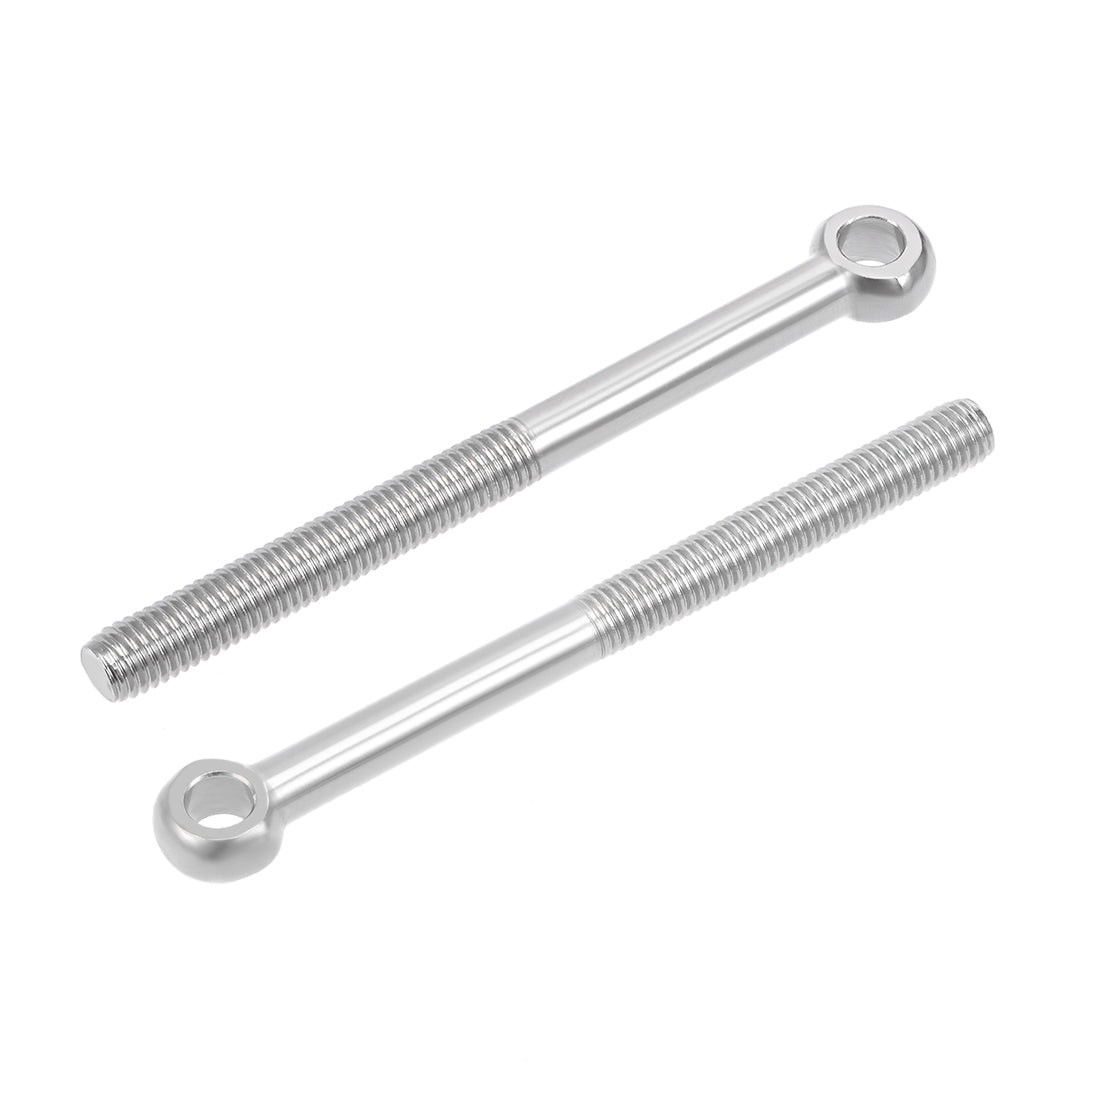 Uxcell Uxcell M12 x 140mm 304 Stainless Steel Machine Shoulder Lift Eye Bolt Rigging 5pcs